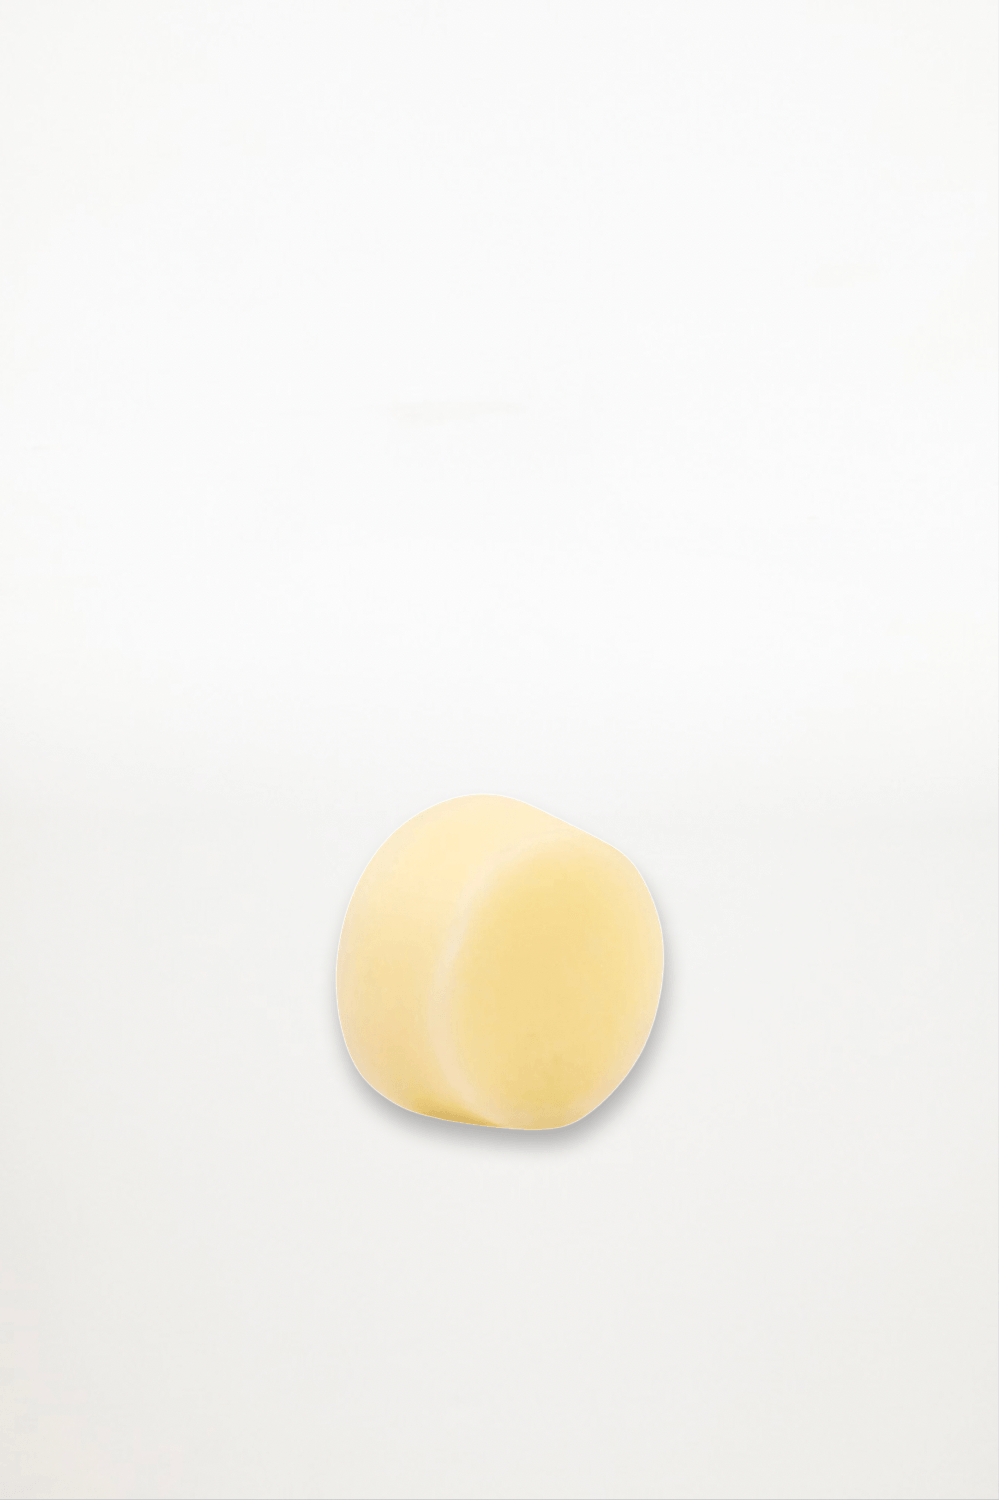 Seed & Sprout - The Conditioner Bar - Citrus & Mint - Ensemble Studios